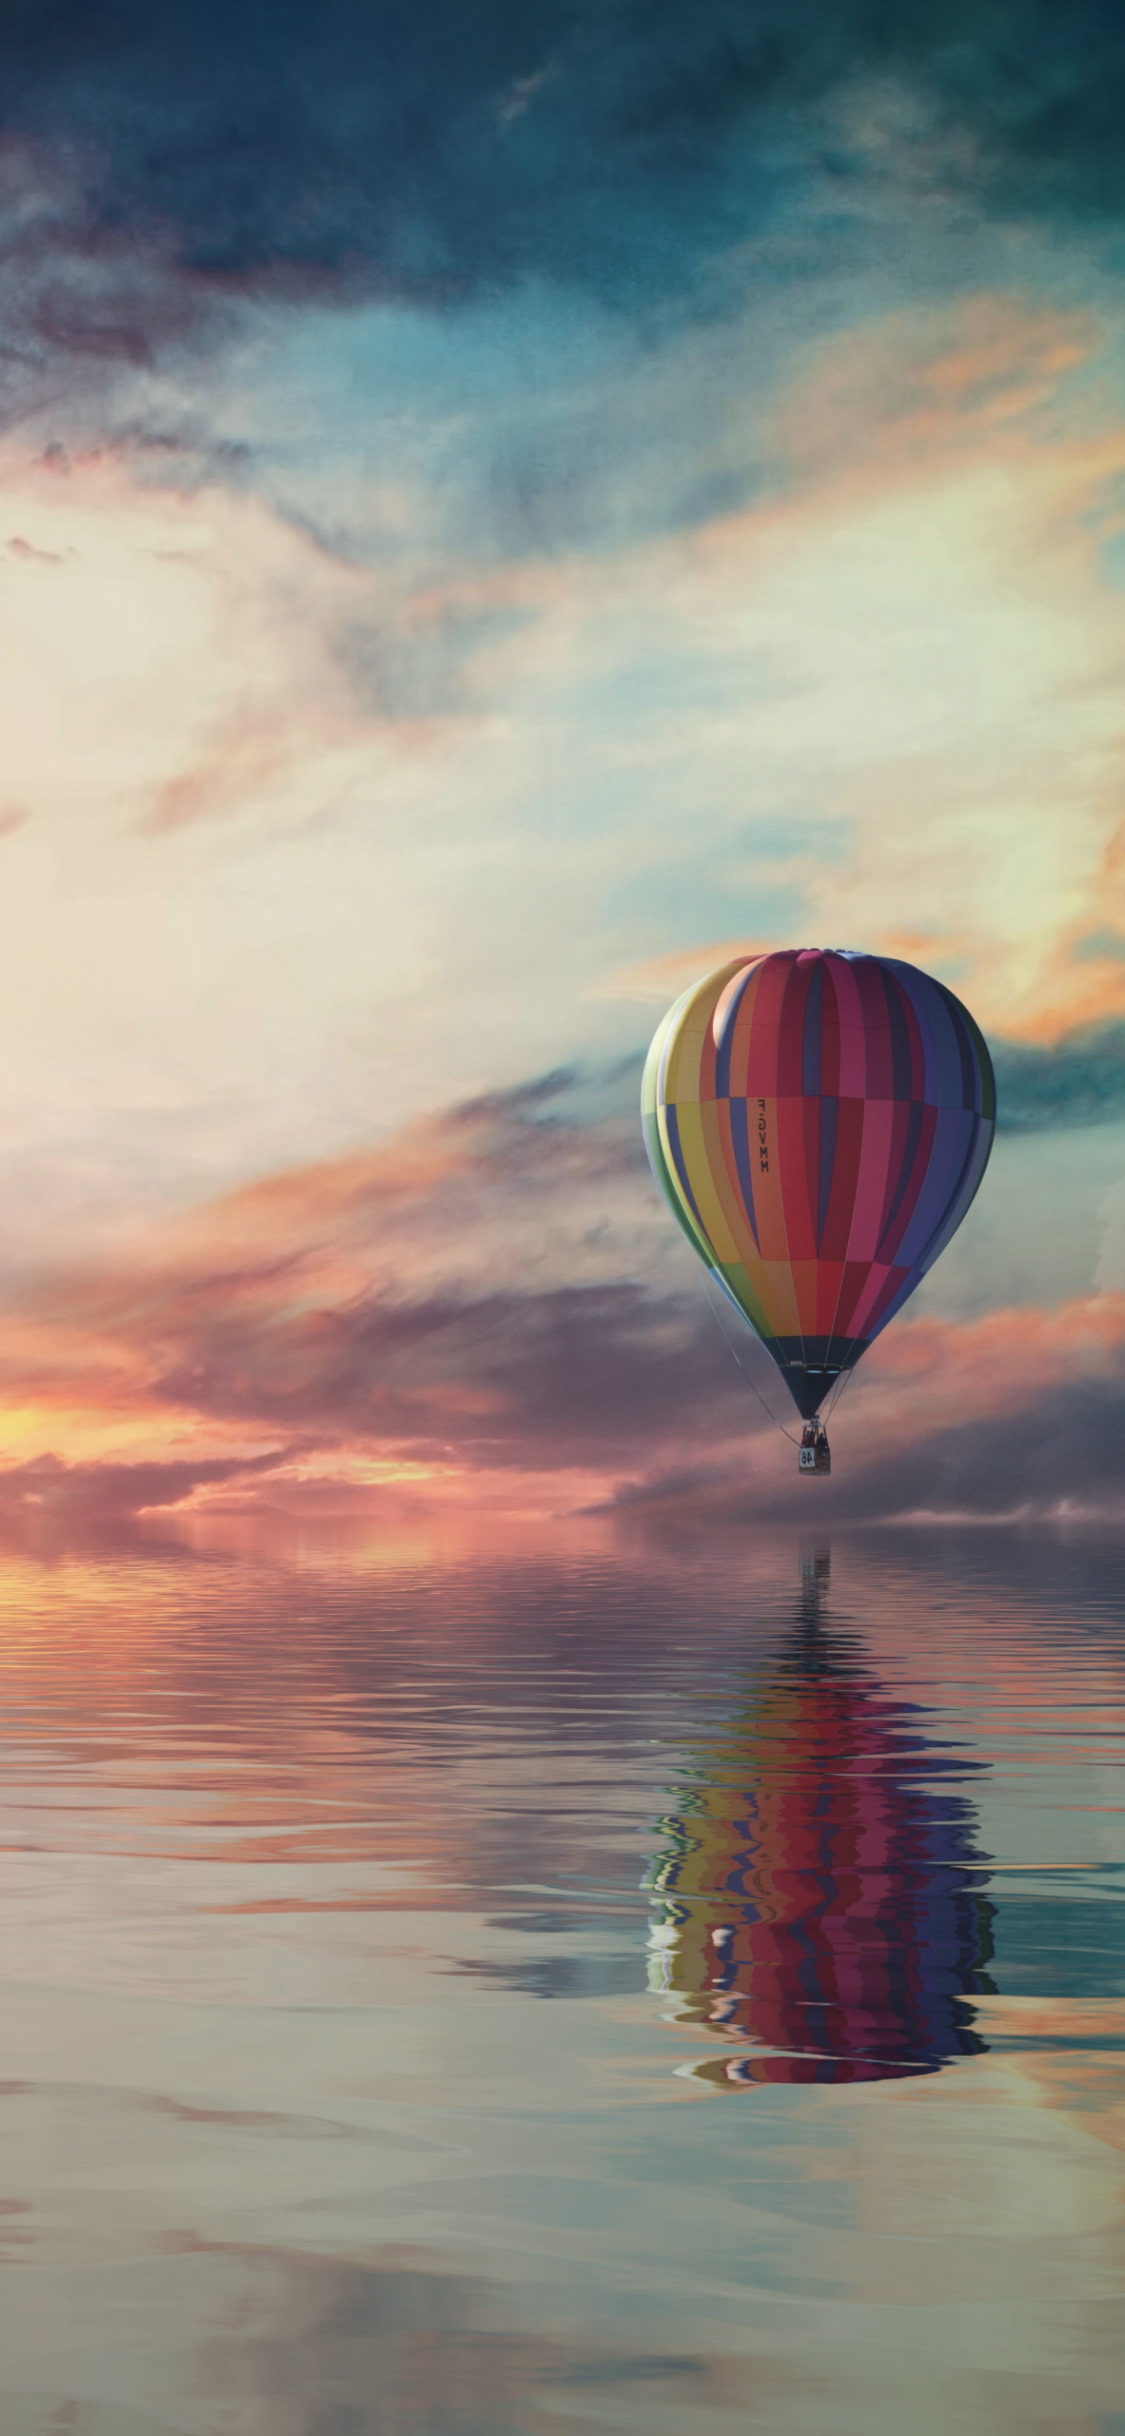 Fantasy travel with the hot air balloon wallpaper 1125x2436